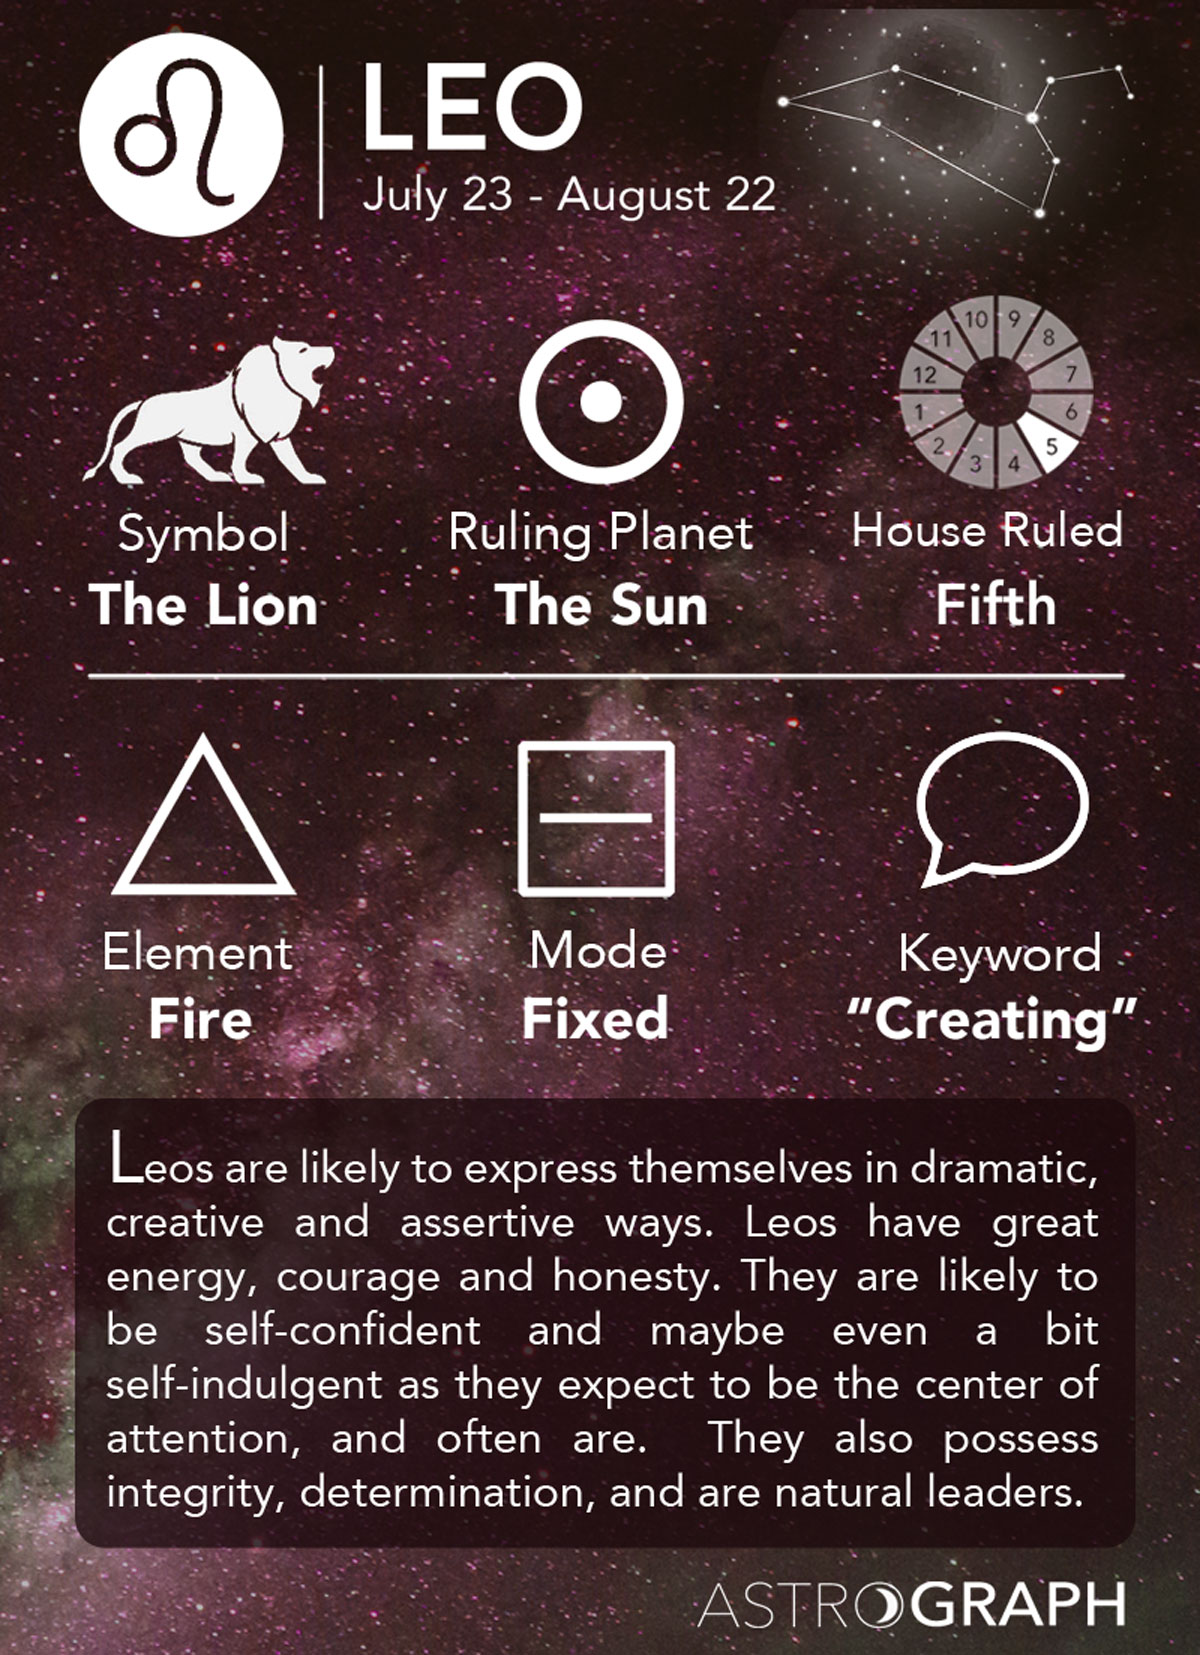 What Is Leo?